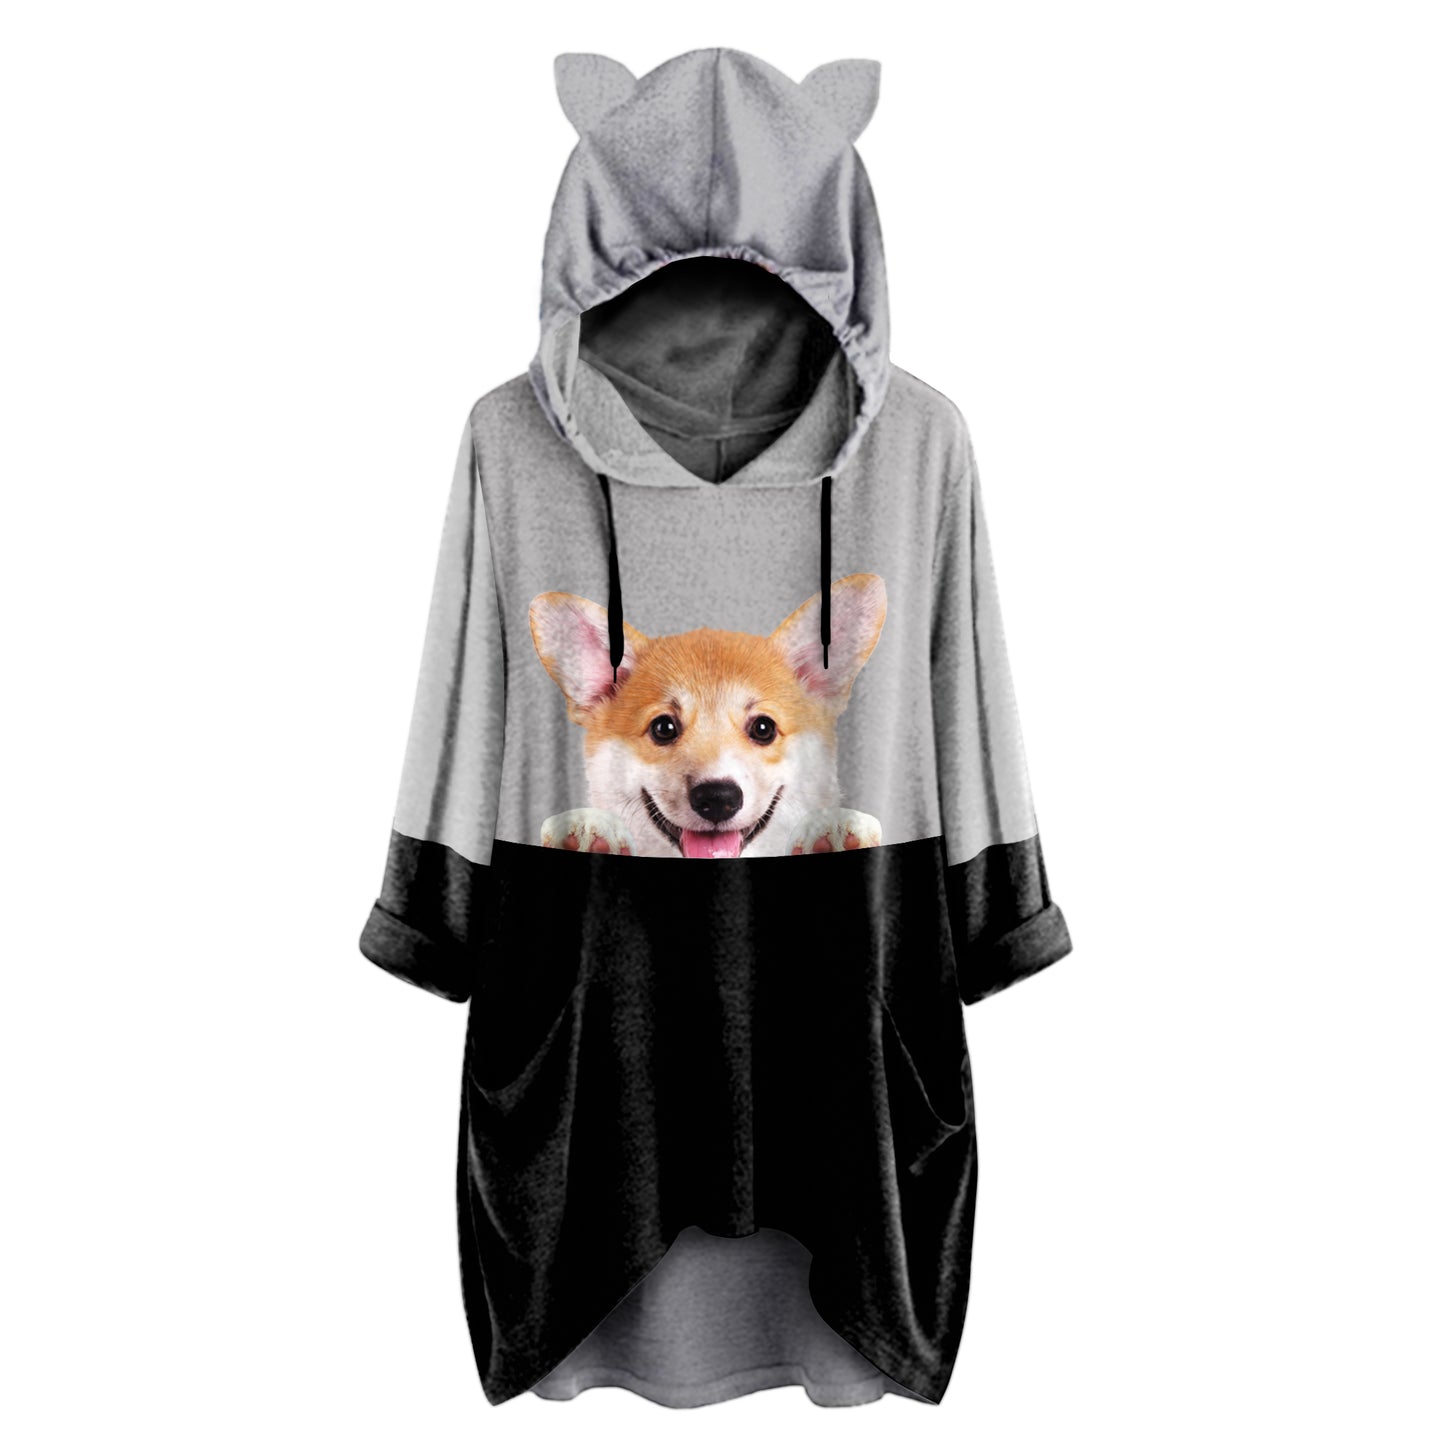 Can You See Me Now - Welsh Corgi Hoodie With Ears V1